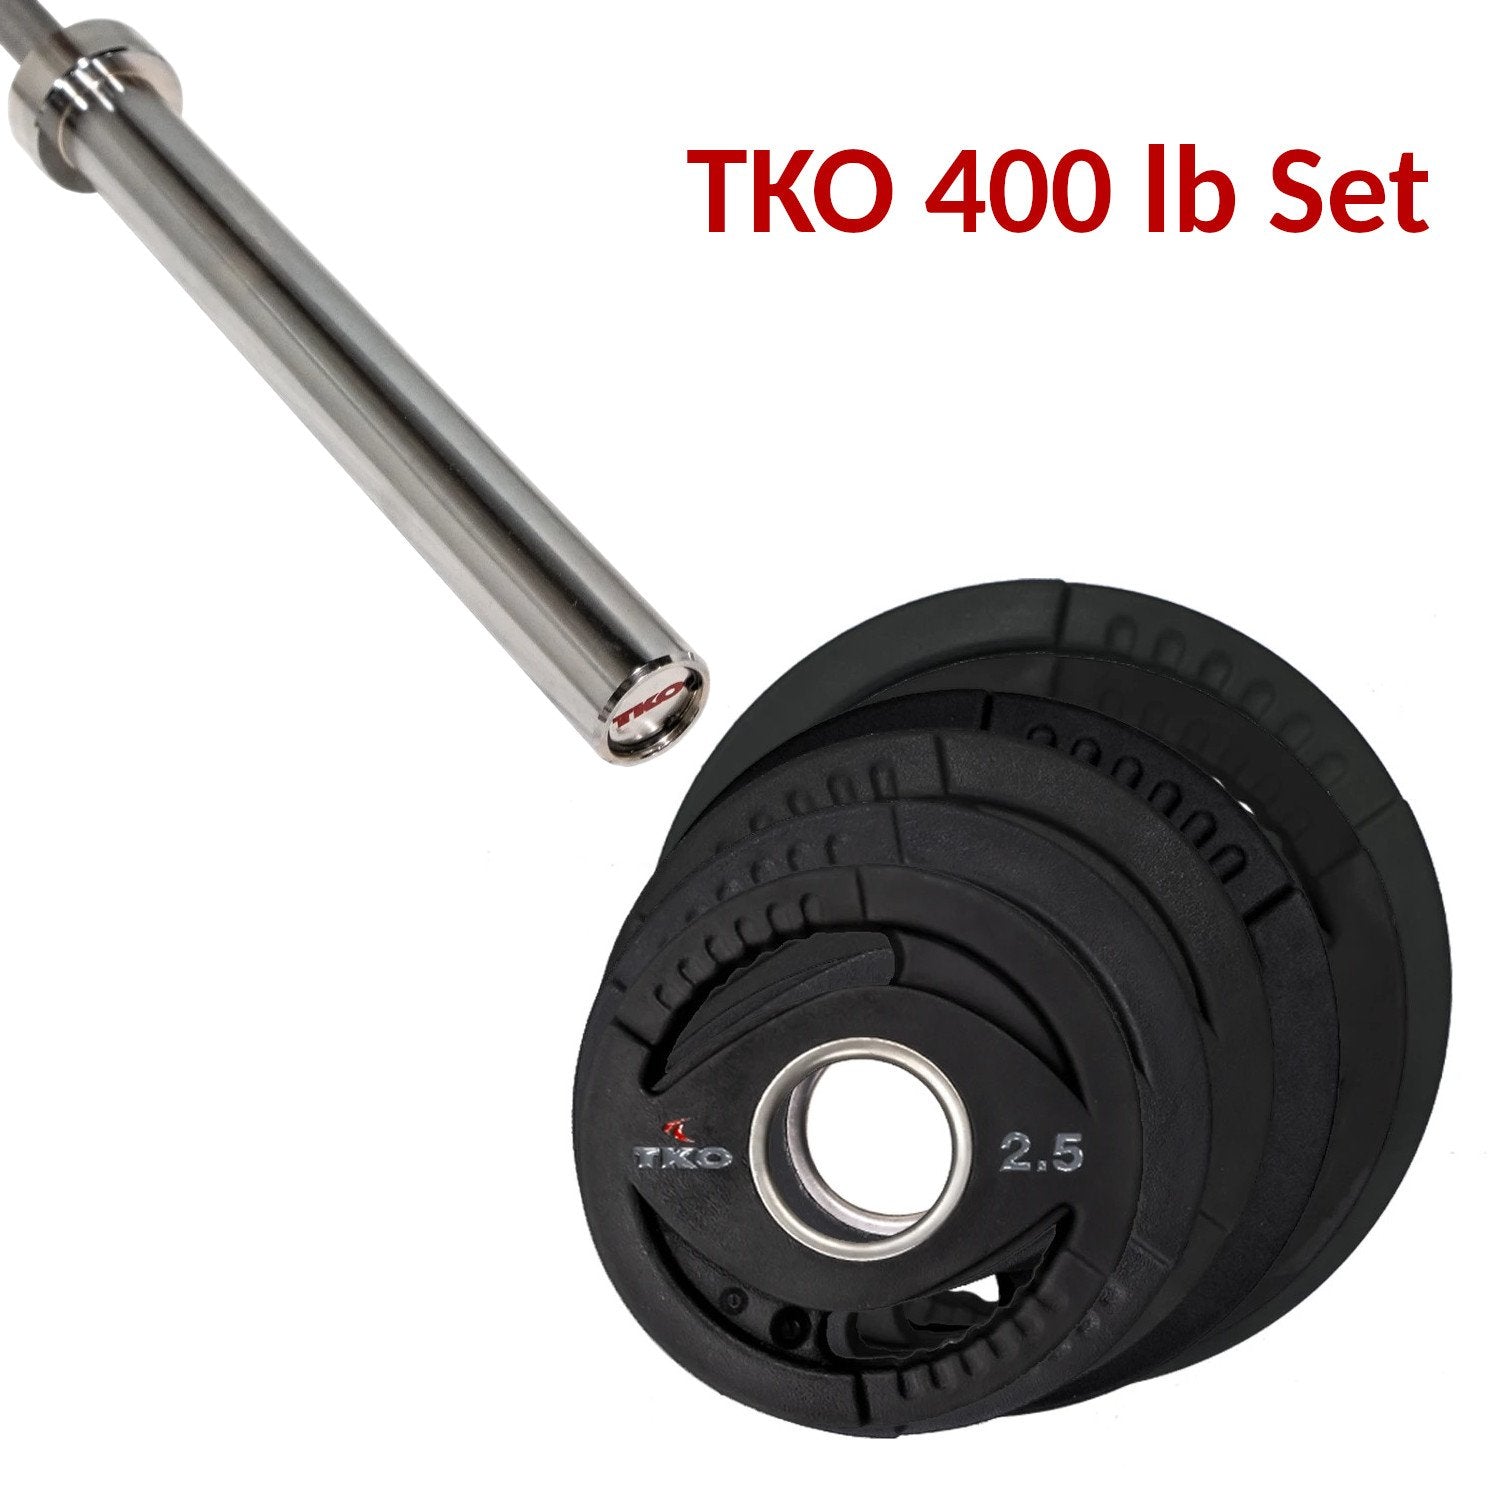 TKO 400 lb Olympic Urethane Plate Set Combo with TKO Olympic Bar.